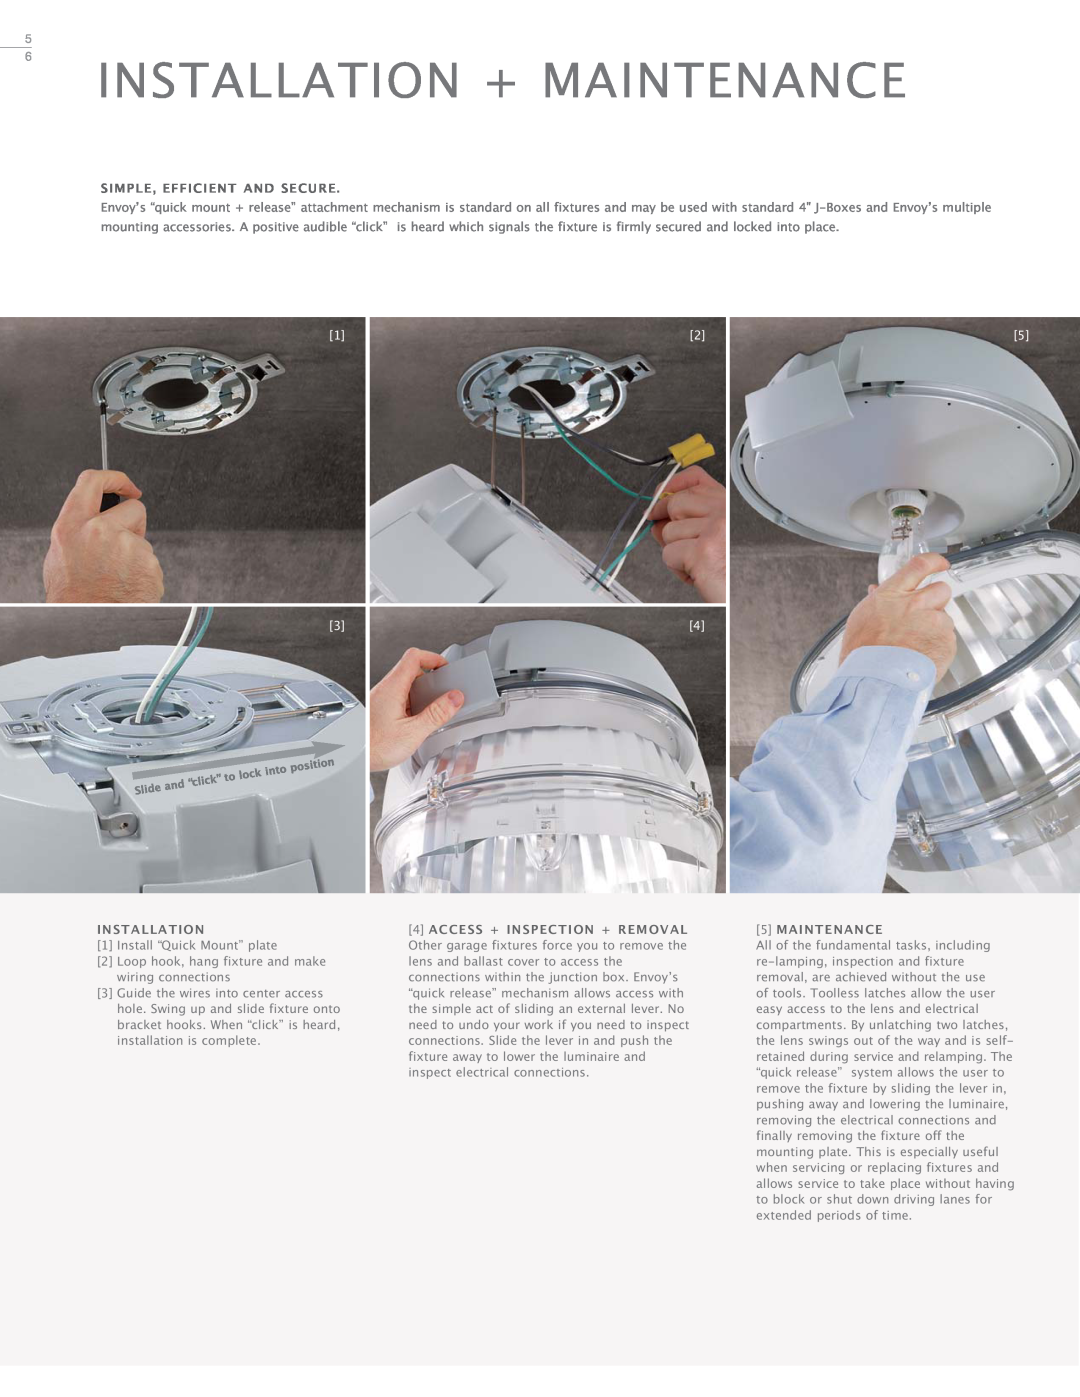 Cooper Lighting Envoy manual Installation + Maintenance, Simple, Efficient And Secure 